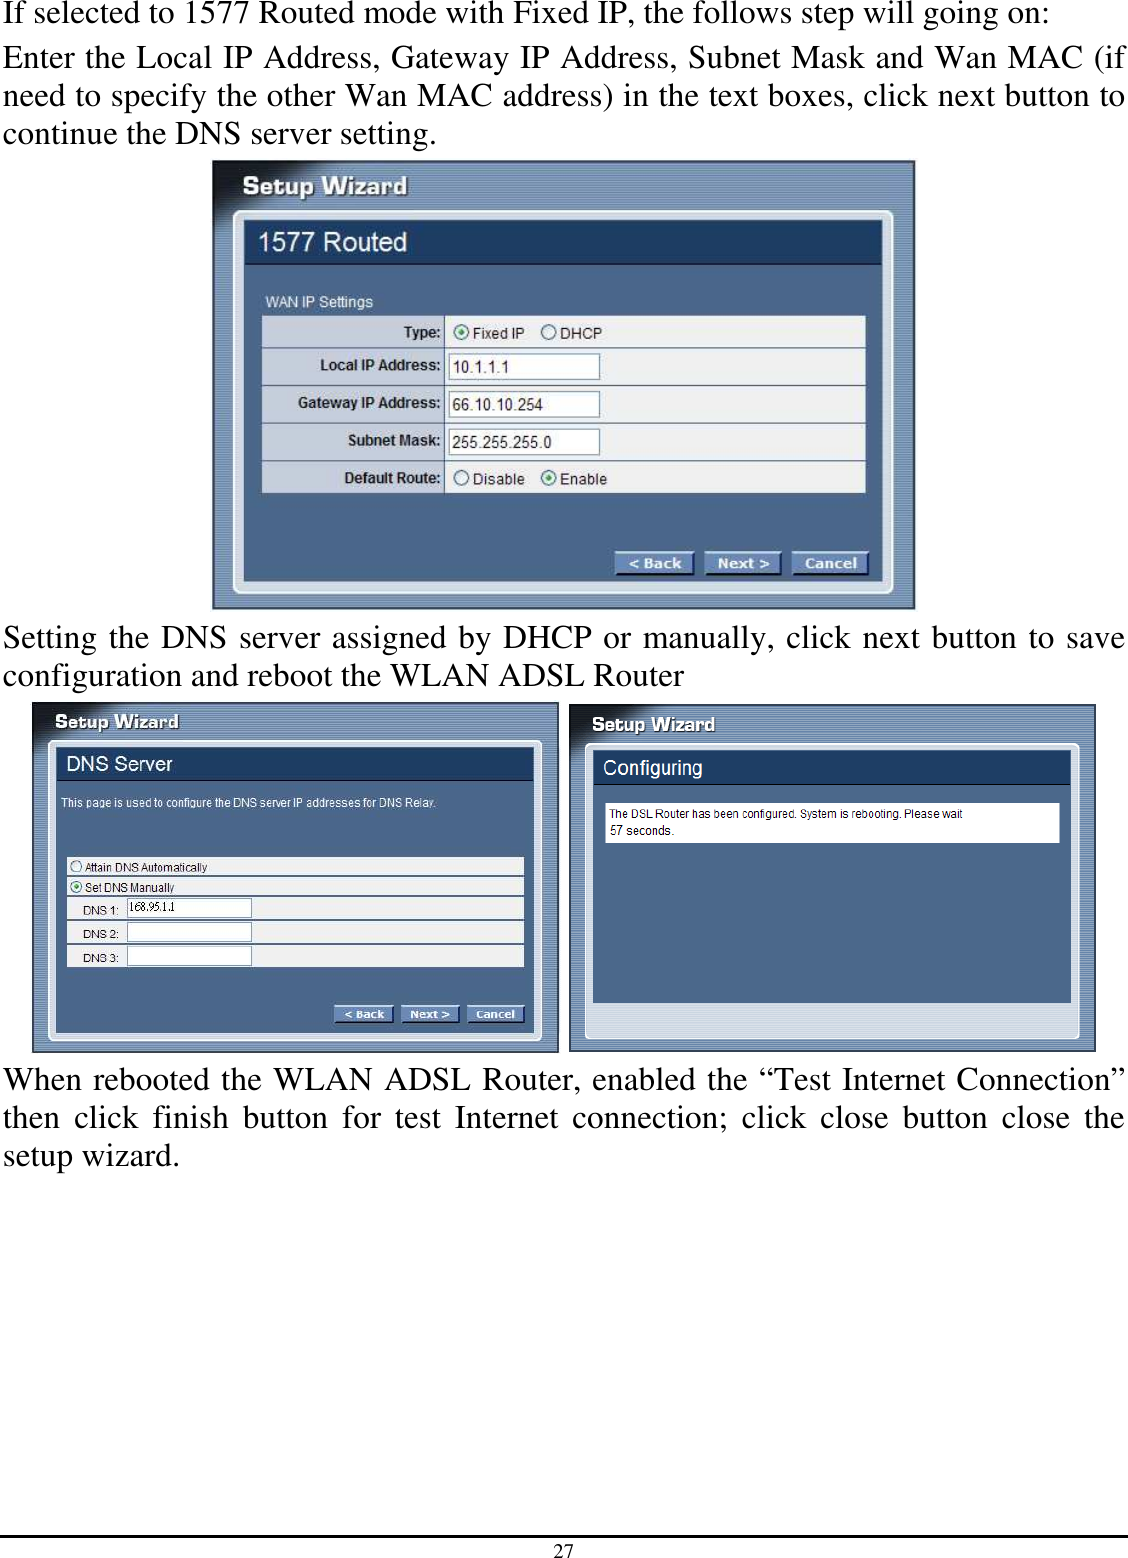 27 If selected to 1577 Routed mode with Fixed IP, the follows step will going on: Enter the Local IP Address, Gateway IP Address, Subnet Mask and Wan MAC (if need to specify the other Wan MAC address) in the text boxes, click next button to continue the DNS server setting.  Setting the DNS server assigned by DHCP or manually, click next button to save configuration and reboot the WLAN ADSL Router    When rebooted the WLAN ADSL Router, enabled the “Test Internet Connection” then  click  finish  button  for  test  Internet  connection;  click  close  button  close  the setup wizard.  